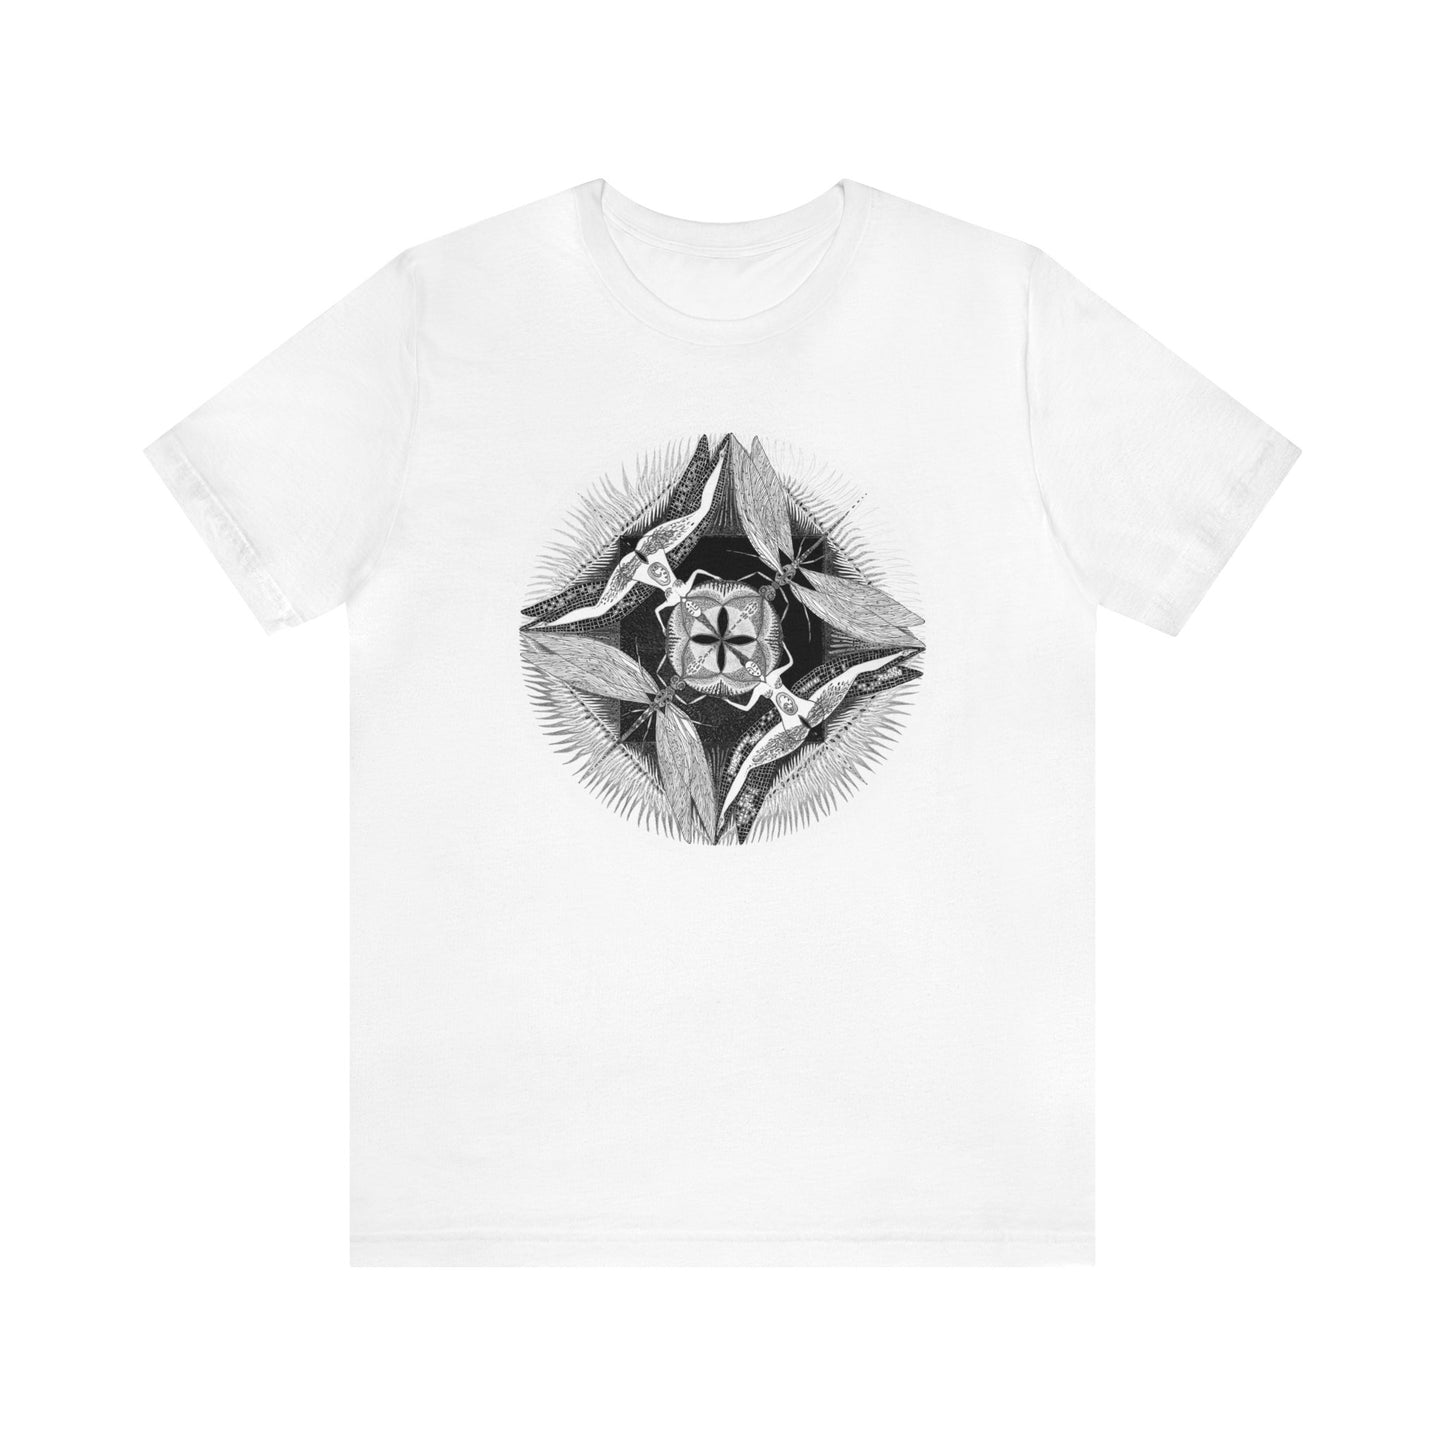 Special Edition "DragonFly" Man White & Black Tee